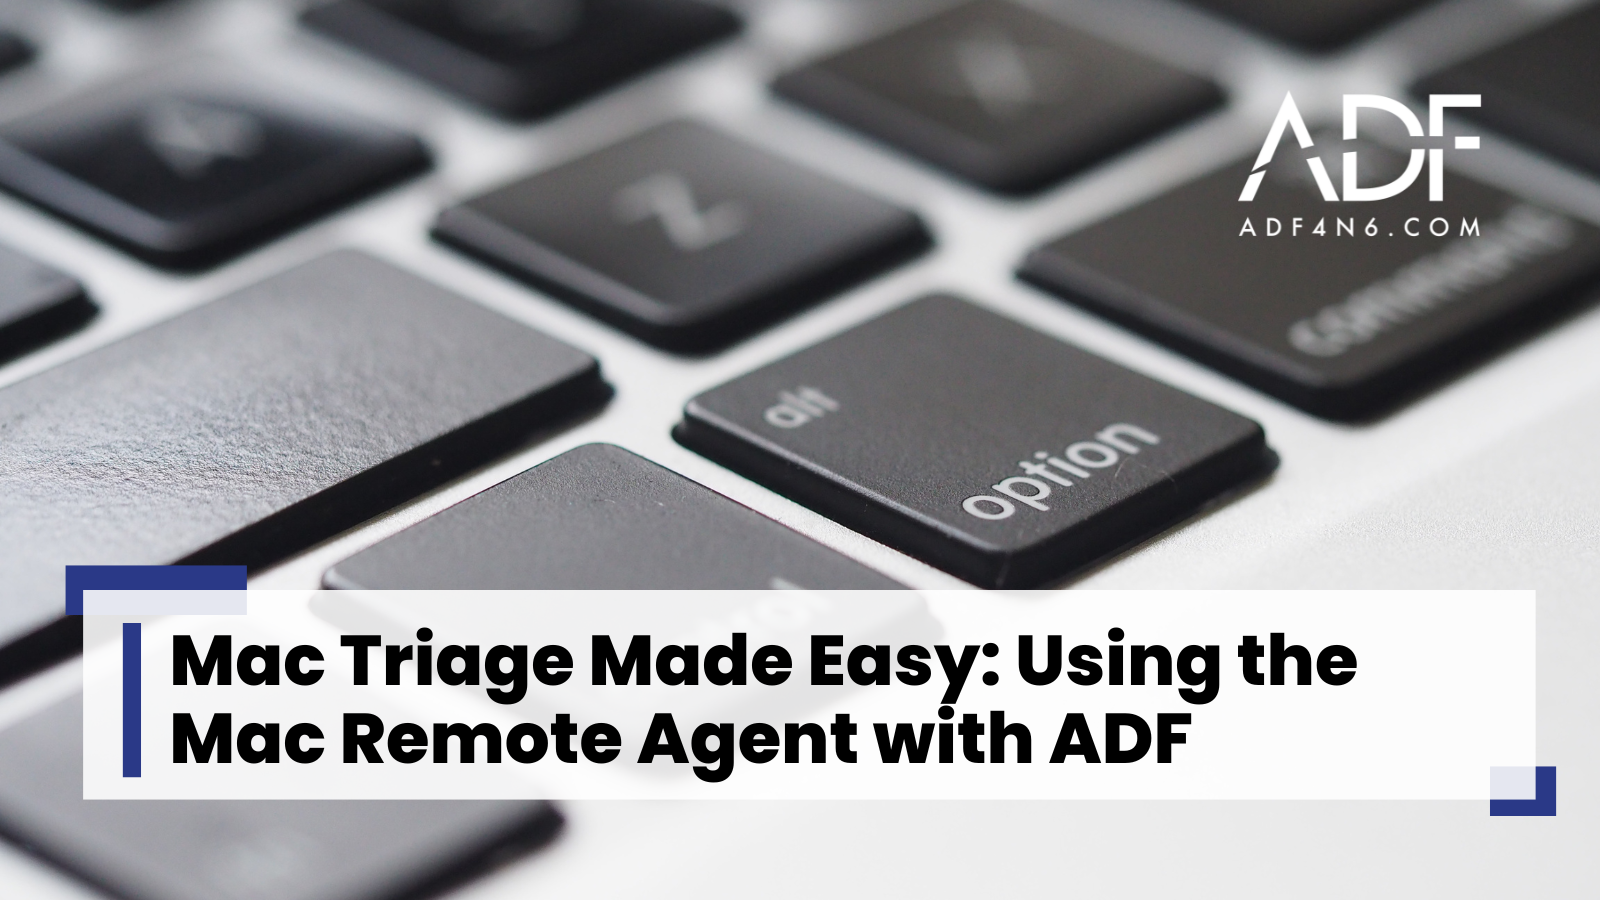 Mac Triage Made Easy: Using the Mac Remote Agent with ADF